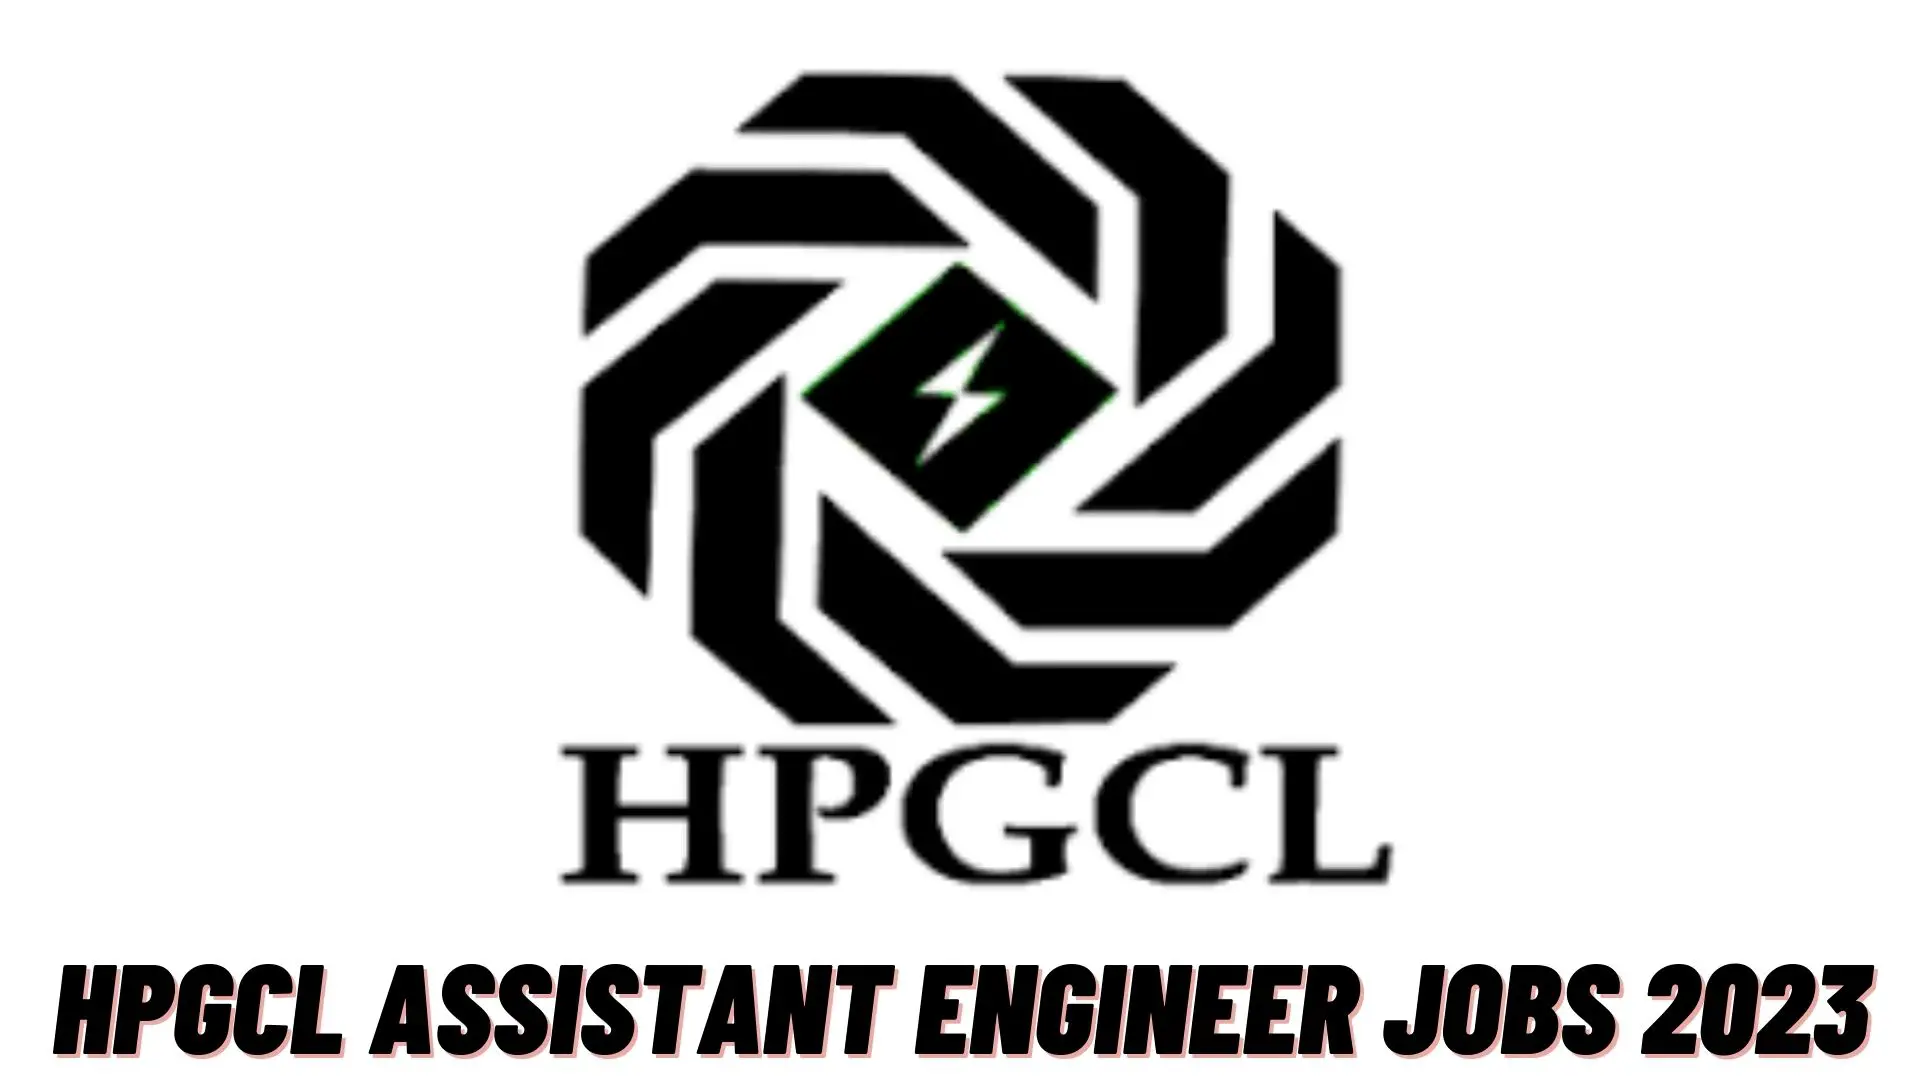 HPGCL Assistant Engineer Jobs 2023